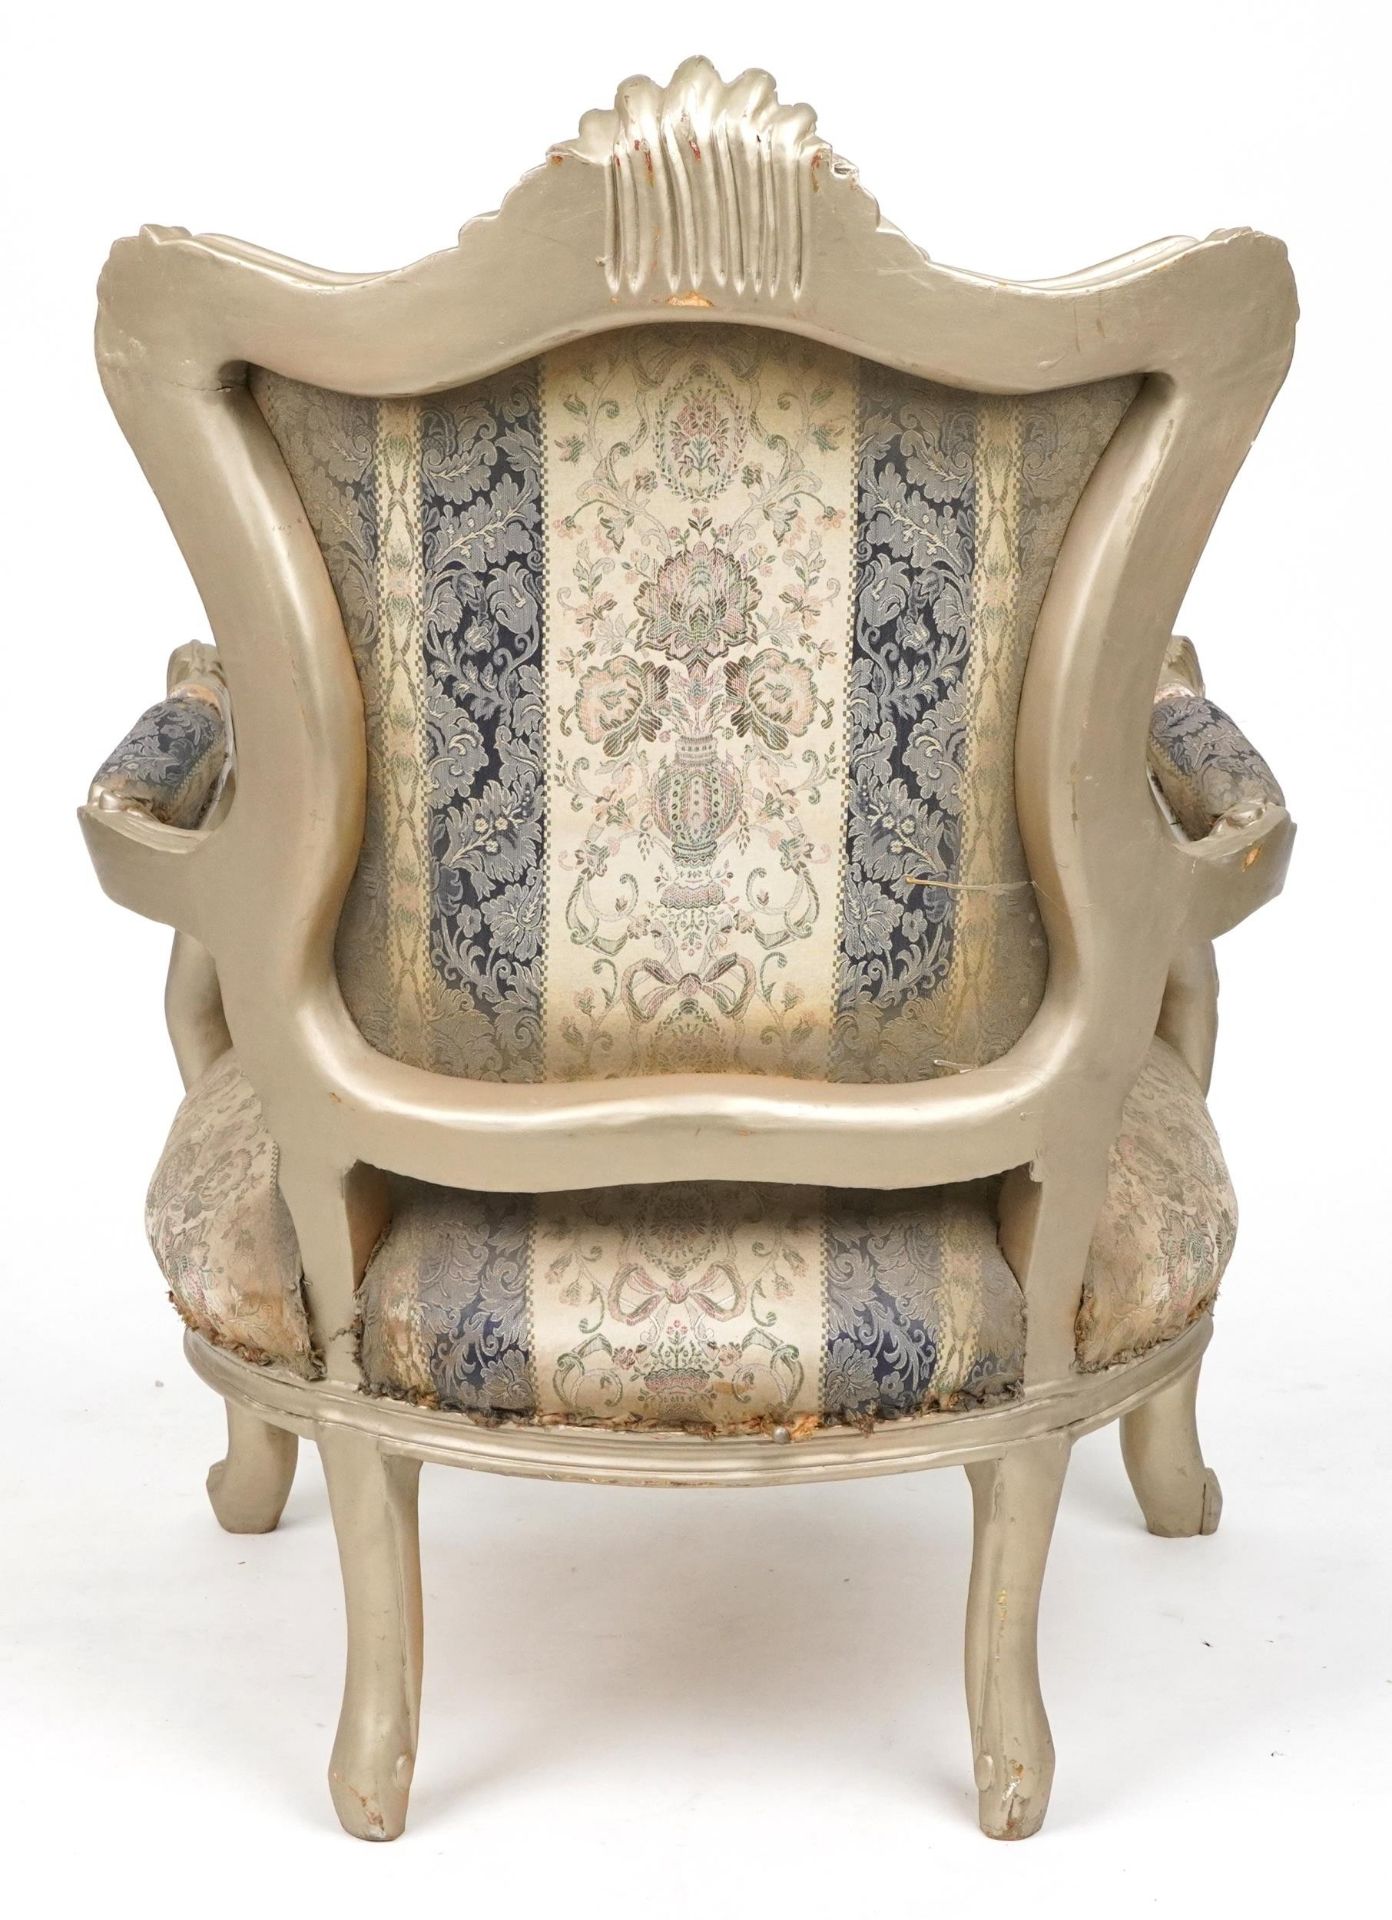 French style ornate gilt open armchair with blue and cream striped floral upholstery, 110cm high - Image 4 of 4